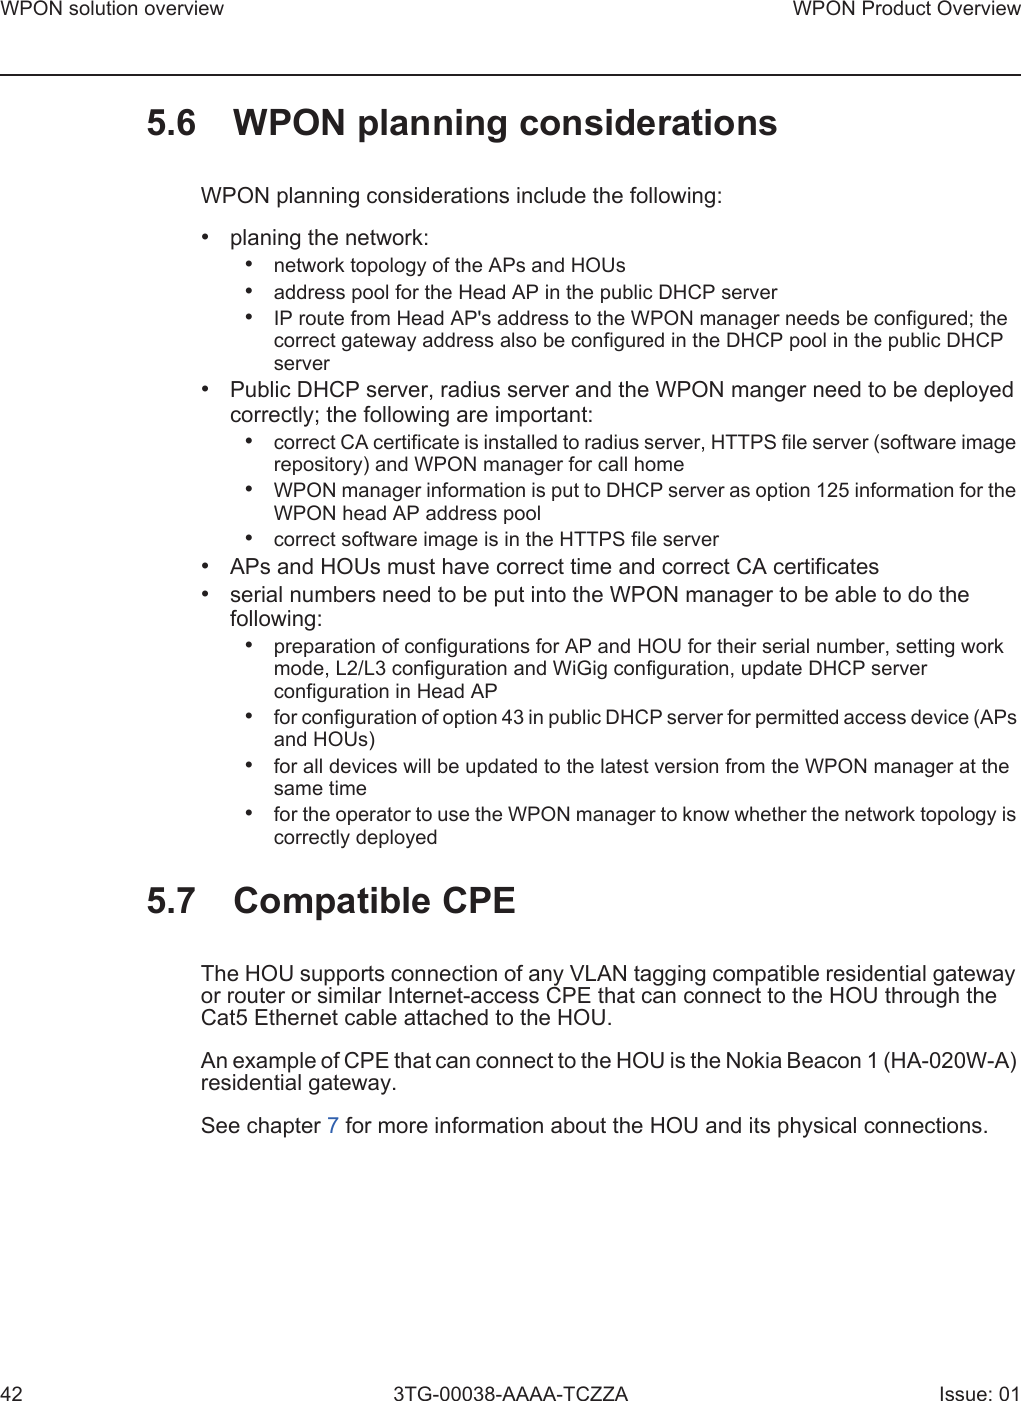 WPON solution overview42WPON Product Overview3TG-00038-AAAA-TCZZA Issue: 015.6 WPON planning considerationsWPON planning considerations include the following:•planing the network:•network topology of the APs and HOUs•address pool for the Head AP in the public DHCP server•IP route from Head AP&apos;s address to the WPON manager needs be configured; thecorrect gateway address also be configured in the DHCP pool in the public DHCPserver•Public DHCP server, radius server and the WPON manger need to be deployedcorrectly; the following are important:•correct CA certificate is installed to radius server, HTTPS file server (software imagerepository) and WPON manager for call home•WPON manager information is put to DHCP server as option 125 information for theWPON head AP address pool•correct software image is in the HTTPS file server•APs and HOUs must have correct time and correct CA certificates•serial numbers need to be put into the WPON manager to be able to do thefollowing:•preparation of configurations for AP and HOU for their serial number, setting workmode, L2/L3 configuration and WiGig configuration, update DHCP serverconfiguration in Head AP•for configuration of option 43 in public DHCP server for permitted access device (APsand HOUs)•for all devices will be updated to the latest version from the WPON manager at thesame time•for the operator to use the WPON manager to know whether the network topology iscorrectly deployed5.7 Compatible CPEThe HOU supports connection of any VLAN tagging compatible residential gateway or router or similar Internet-access CPE that can connect to the HOU through the Cat5 Ethernet cable attached to the HOU. An example of CPE that can connect to the HOU is the Nokia Beacon 1 (HA-020W-A) residential gateway.See chapter 7 for more information about the HOU and its physical connections.